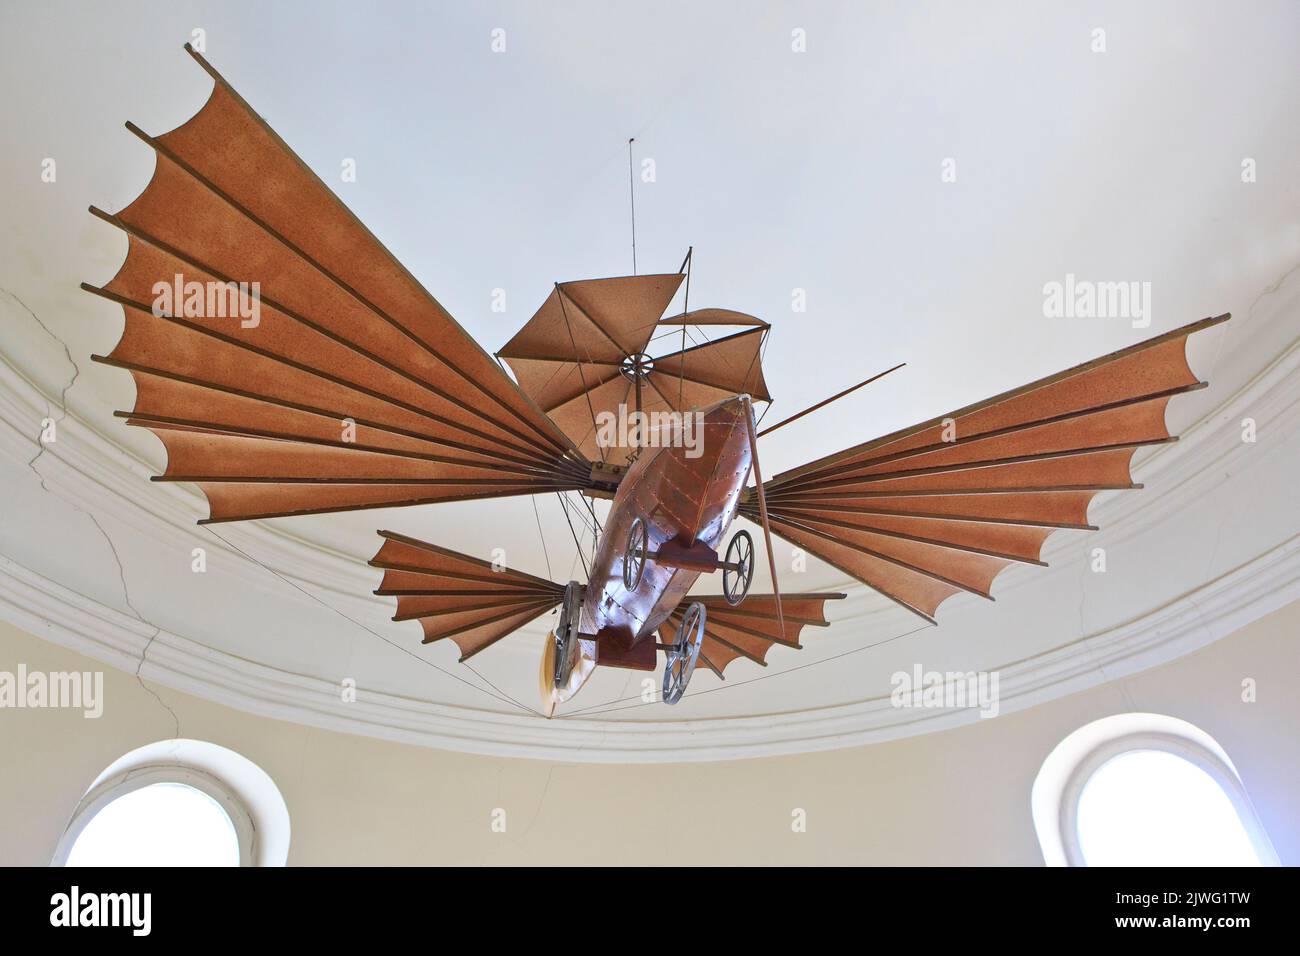 Imaginary aircraft in the former home of the world famous French author Jules Verne (1828-1905) in Amiens (Somme), France Stock Photo